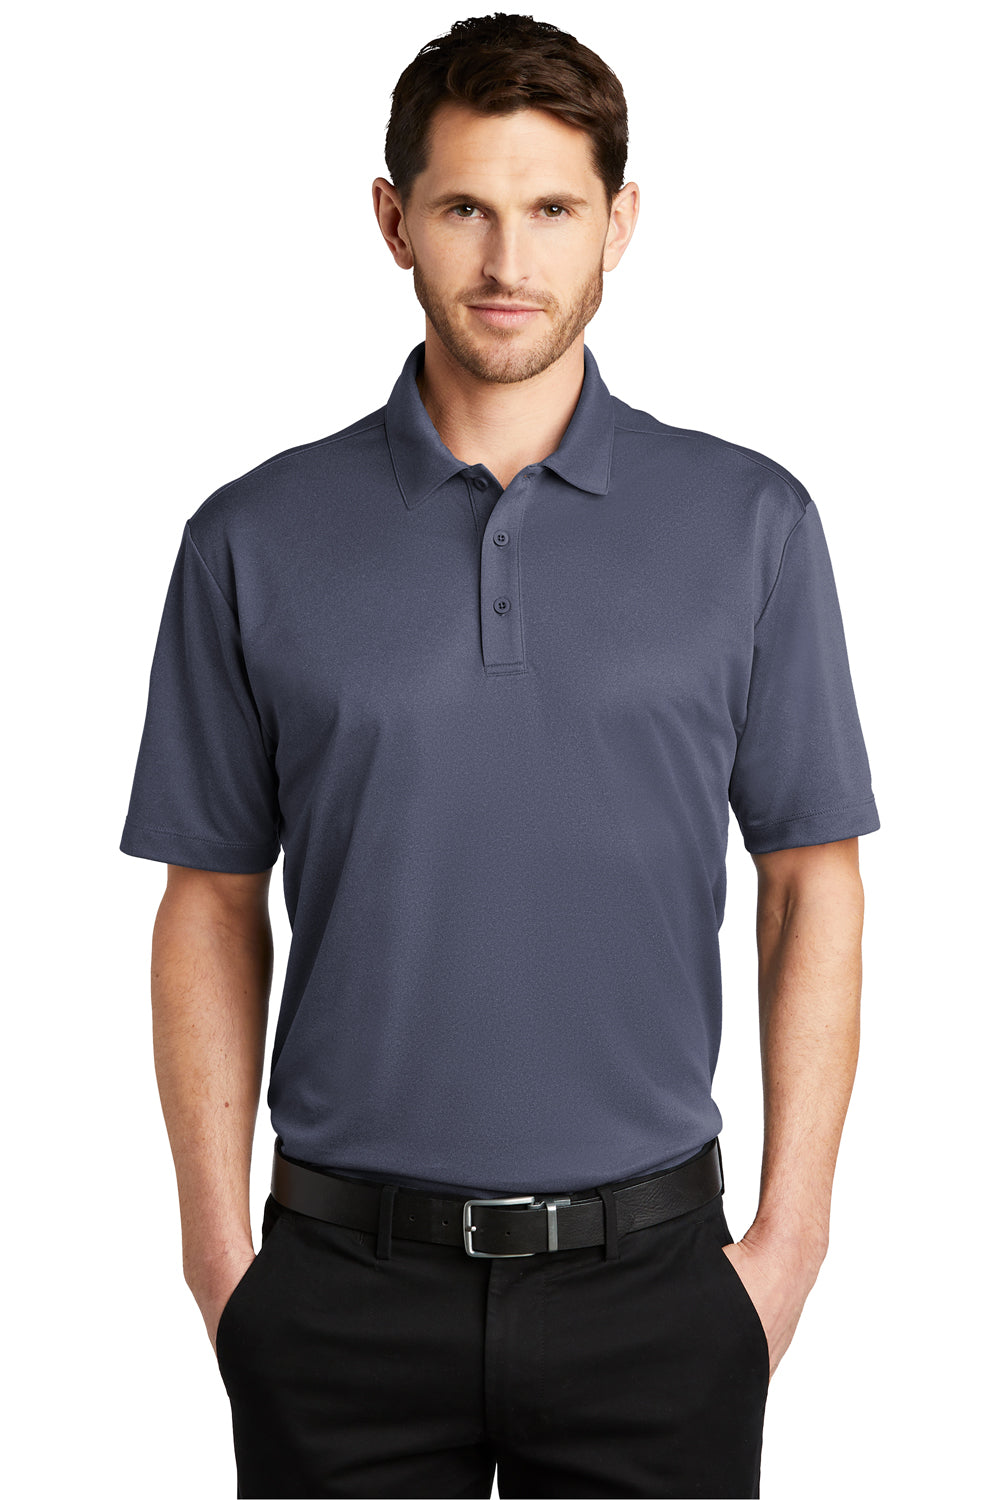 Port Authority Mens Performance Silk Touch Short Sleeve Polo Shirt Heather Navy Blue Front